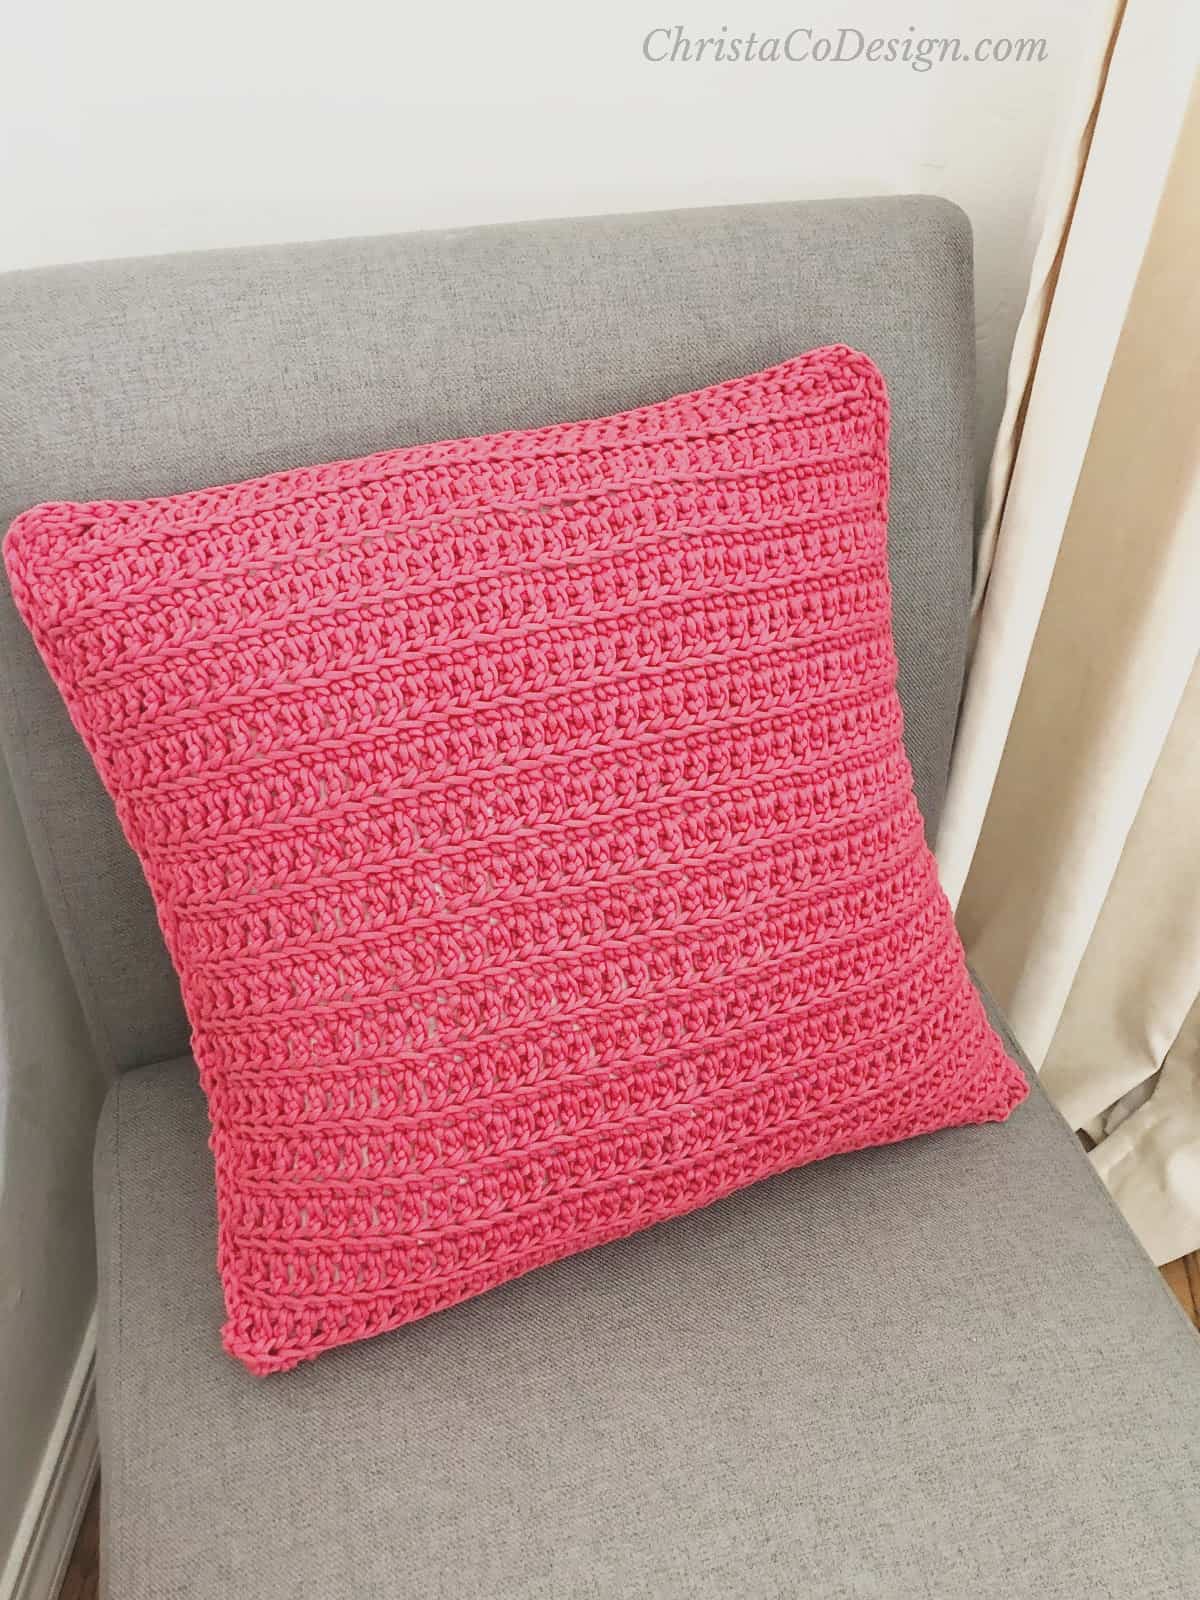 Red crochet pillow with envelope closure on grey chair.